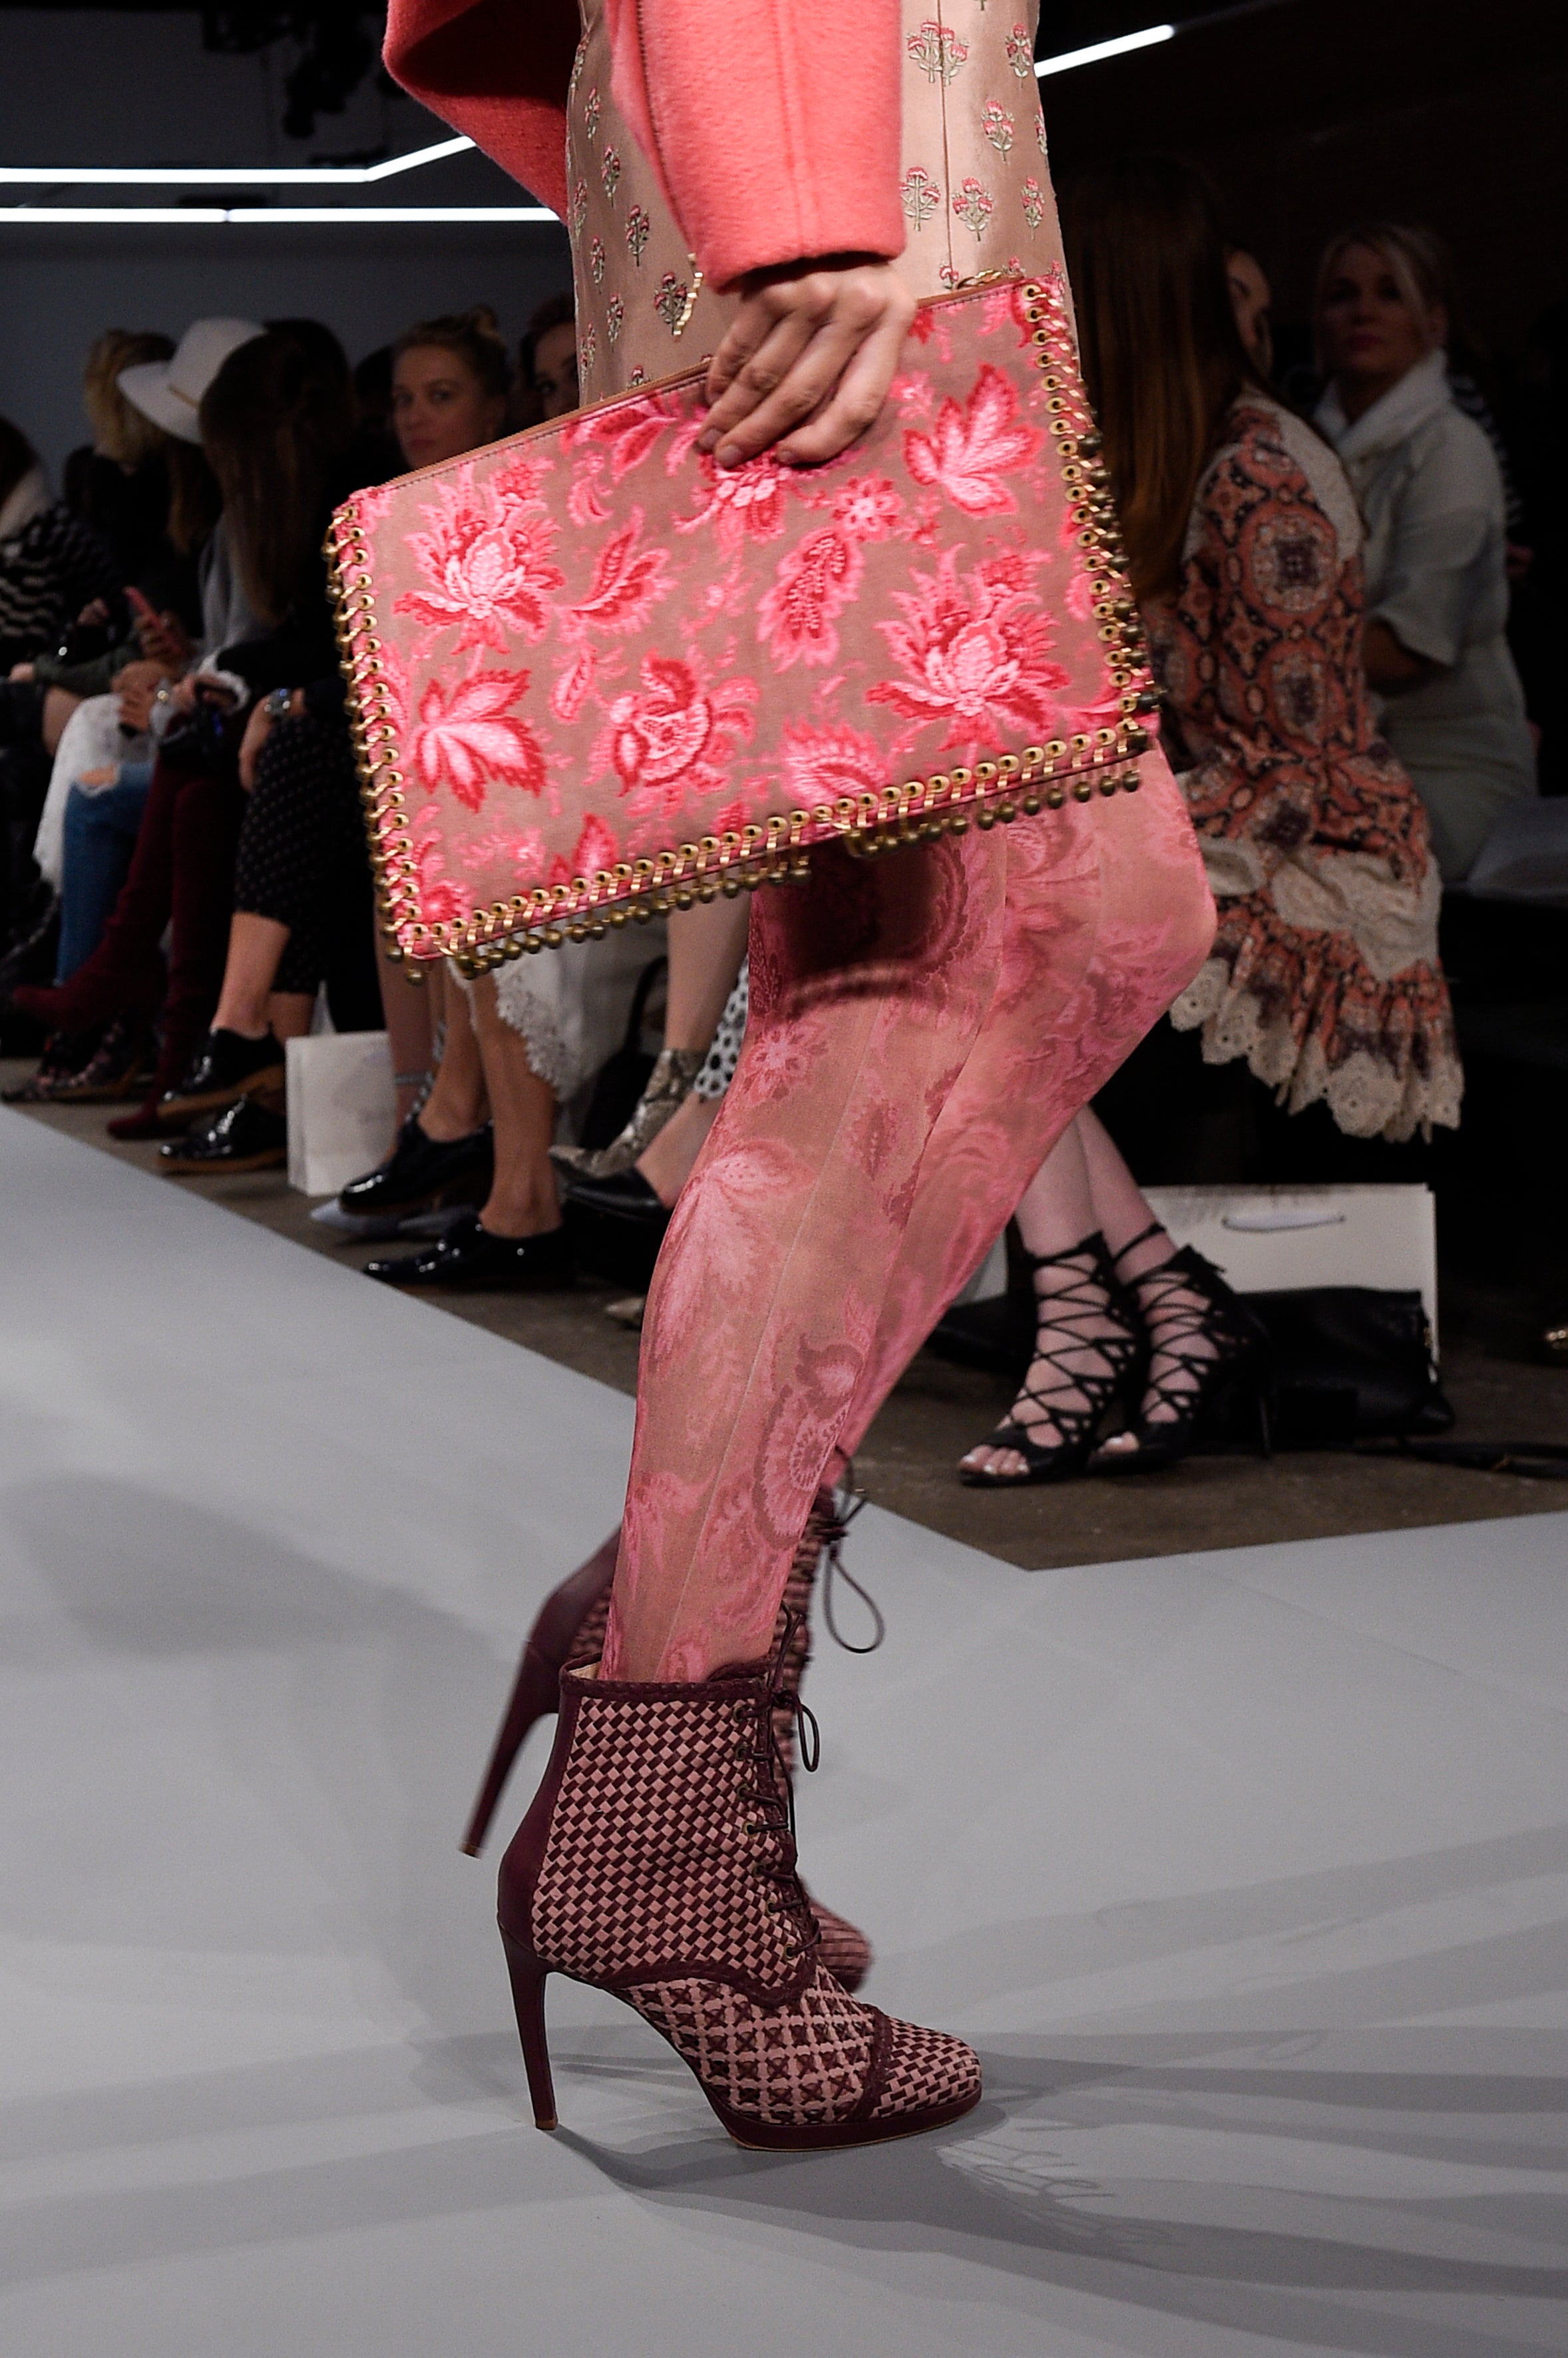 Swoon! 25 Shoes and Bags From NYFW We're Craving
